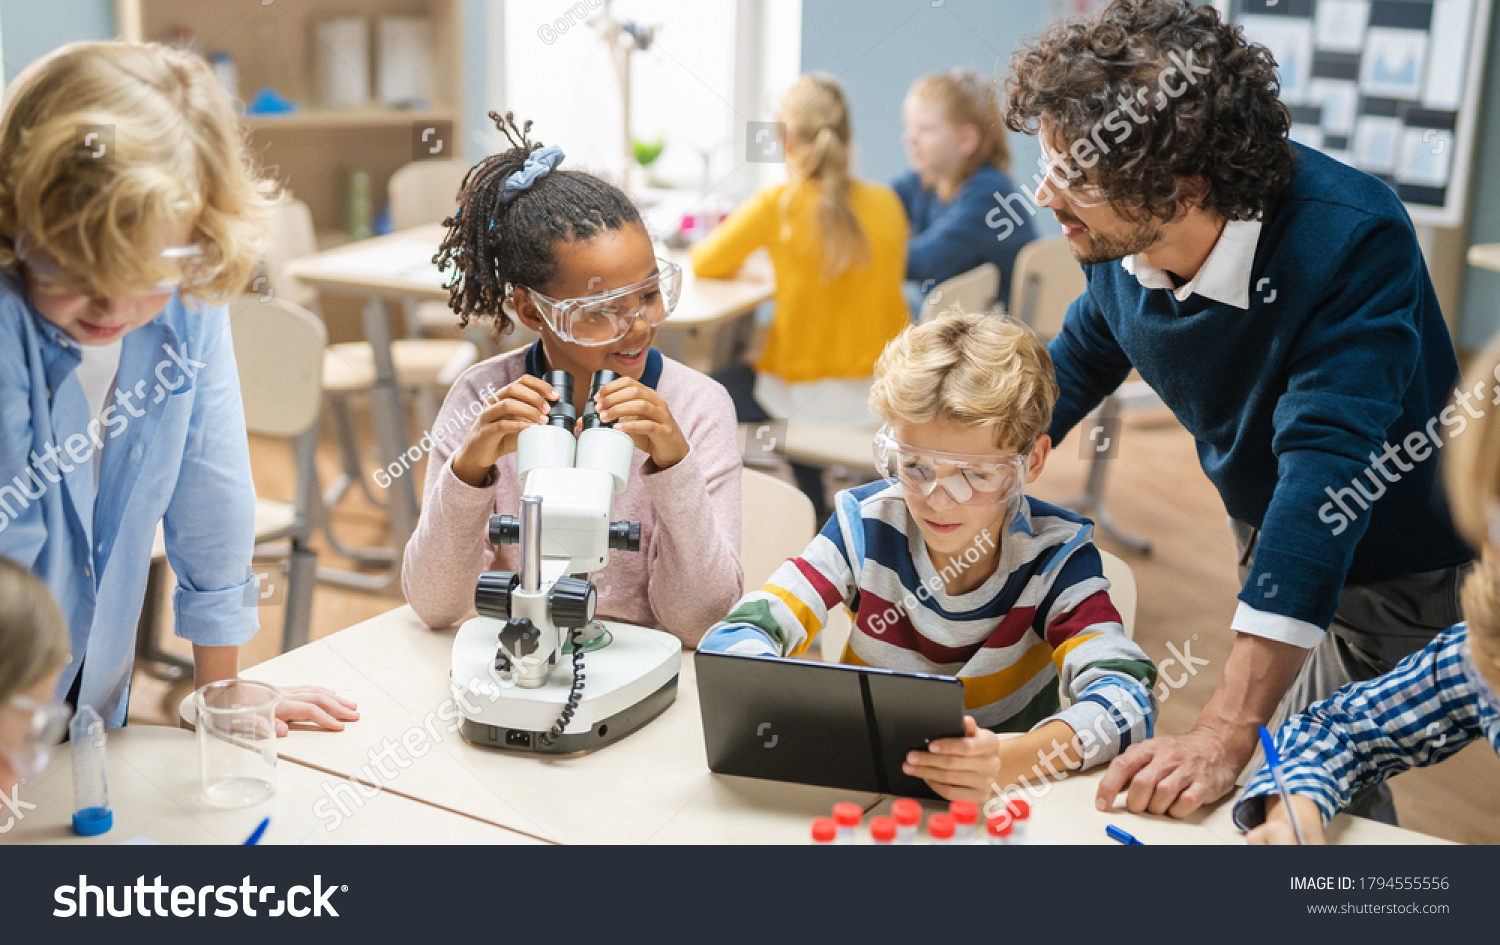 Elementary School Science Classroom: Cute Little Girl Looks Under Microscope, Boy Uses Digital Tablet Computer to Check Information on the Internet. Teacher Observes from Behind #1794555556